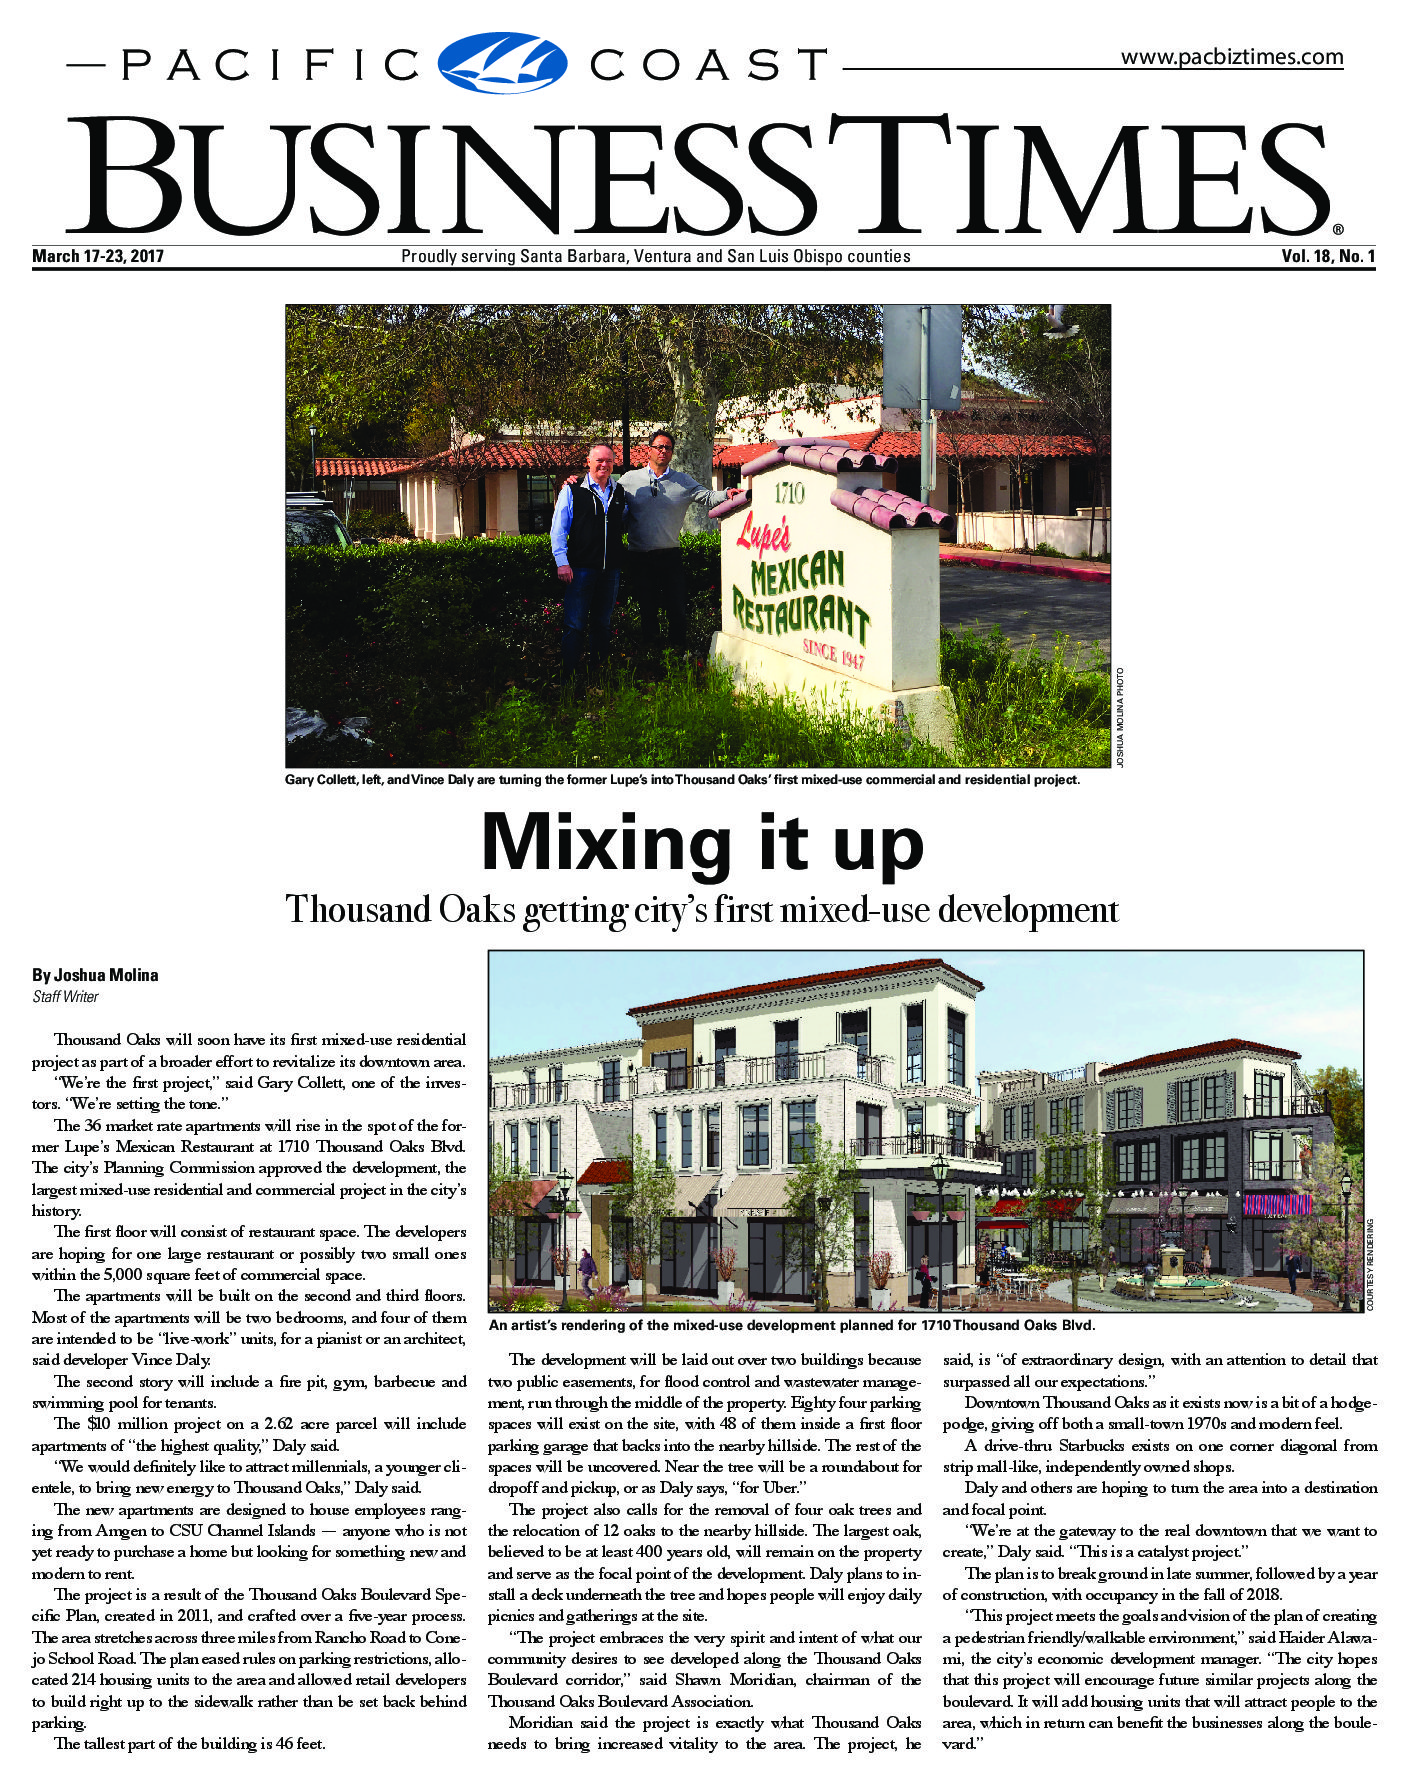 Pacific Coast Business Times: Mixing it up – Thousand Oaks getting city’s first mixed-use development